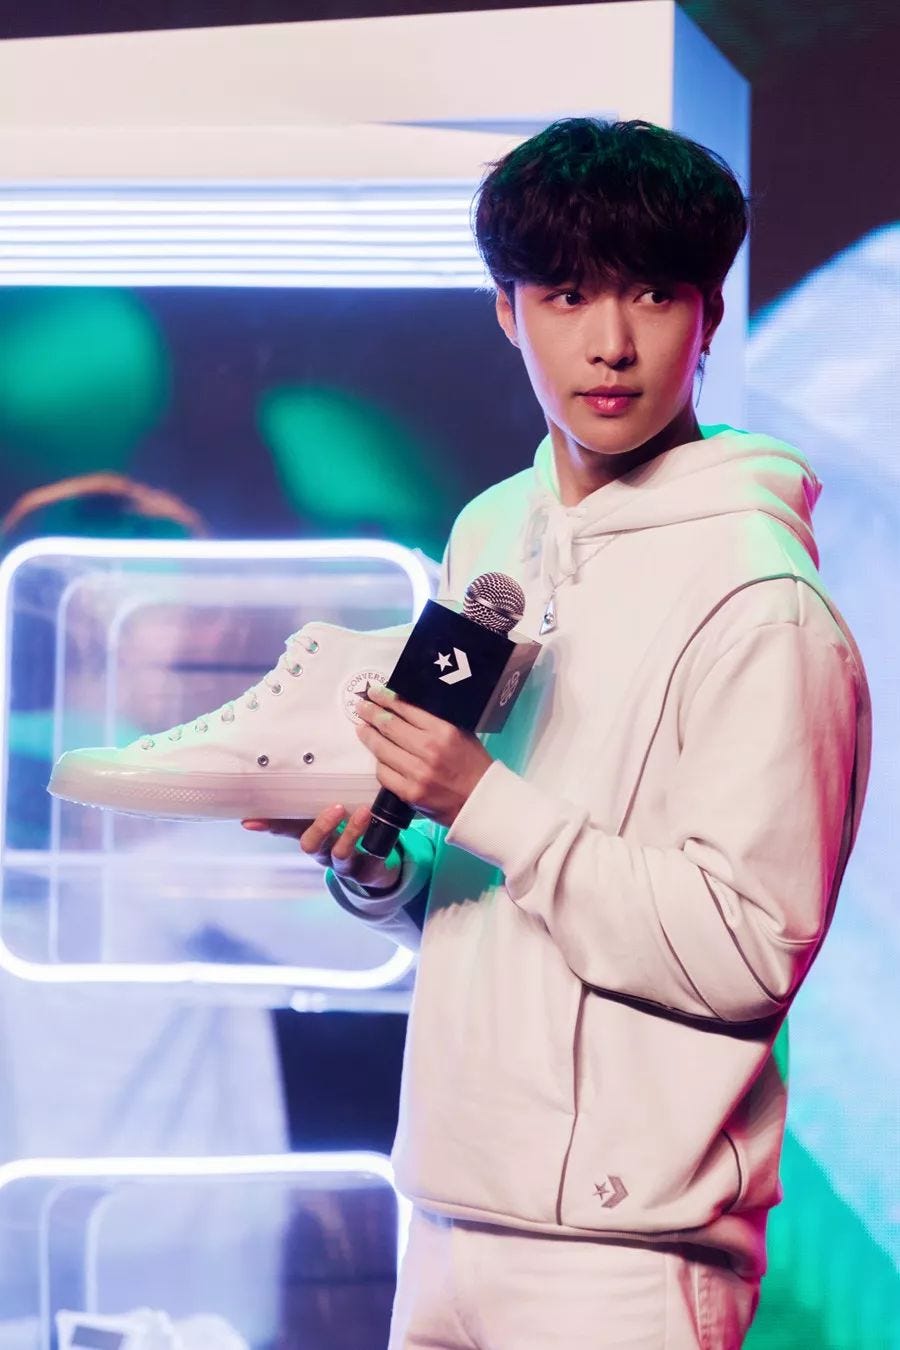 FightClub China x Lay Zhang on Converse | by XtweetTRANS for LAY | Medium